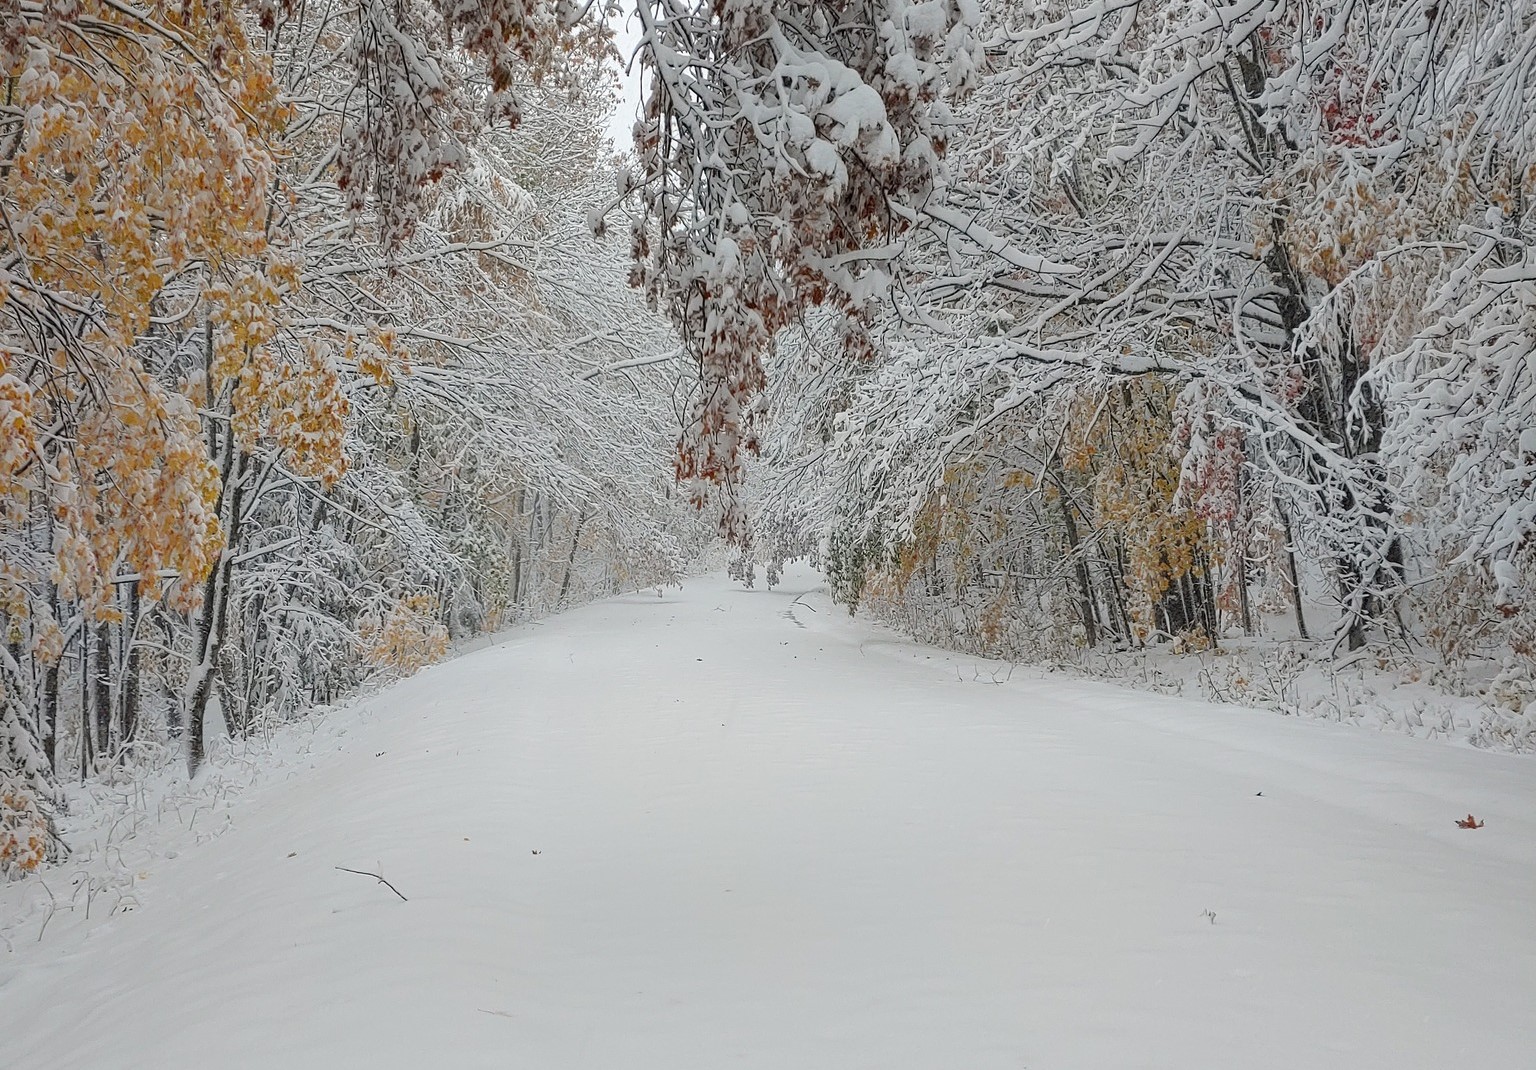 Photos: More than a foot of snow falls on Michigan's Porcupine Mountains 